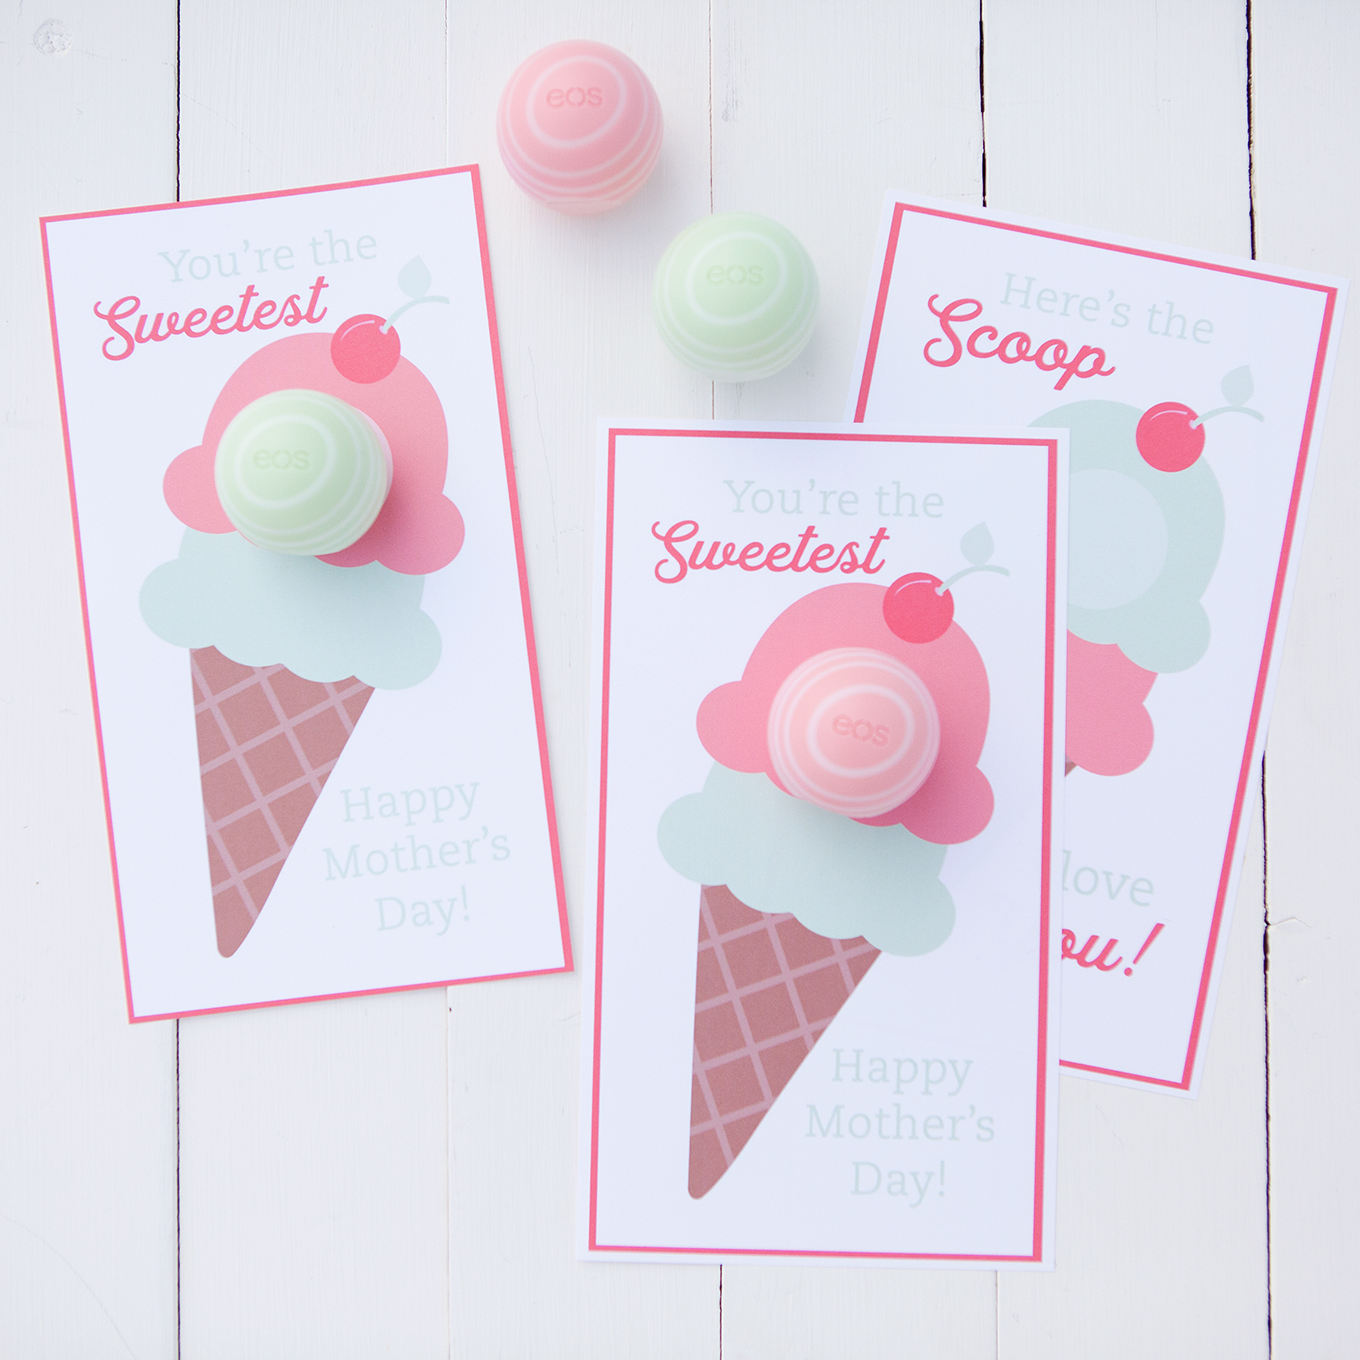 Mother's Day will be here before you know it – celebrate the special mom in your life with a simple card and her favorite EOS lip balm!